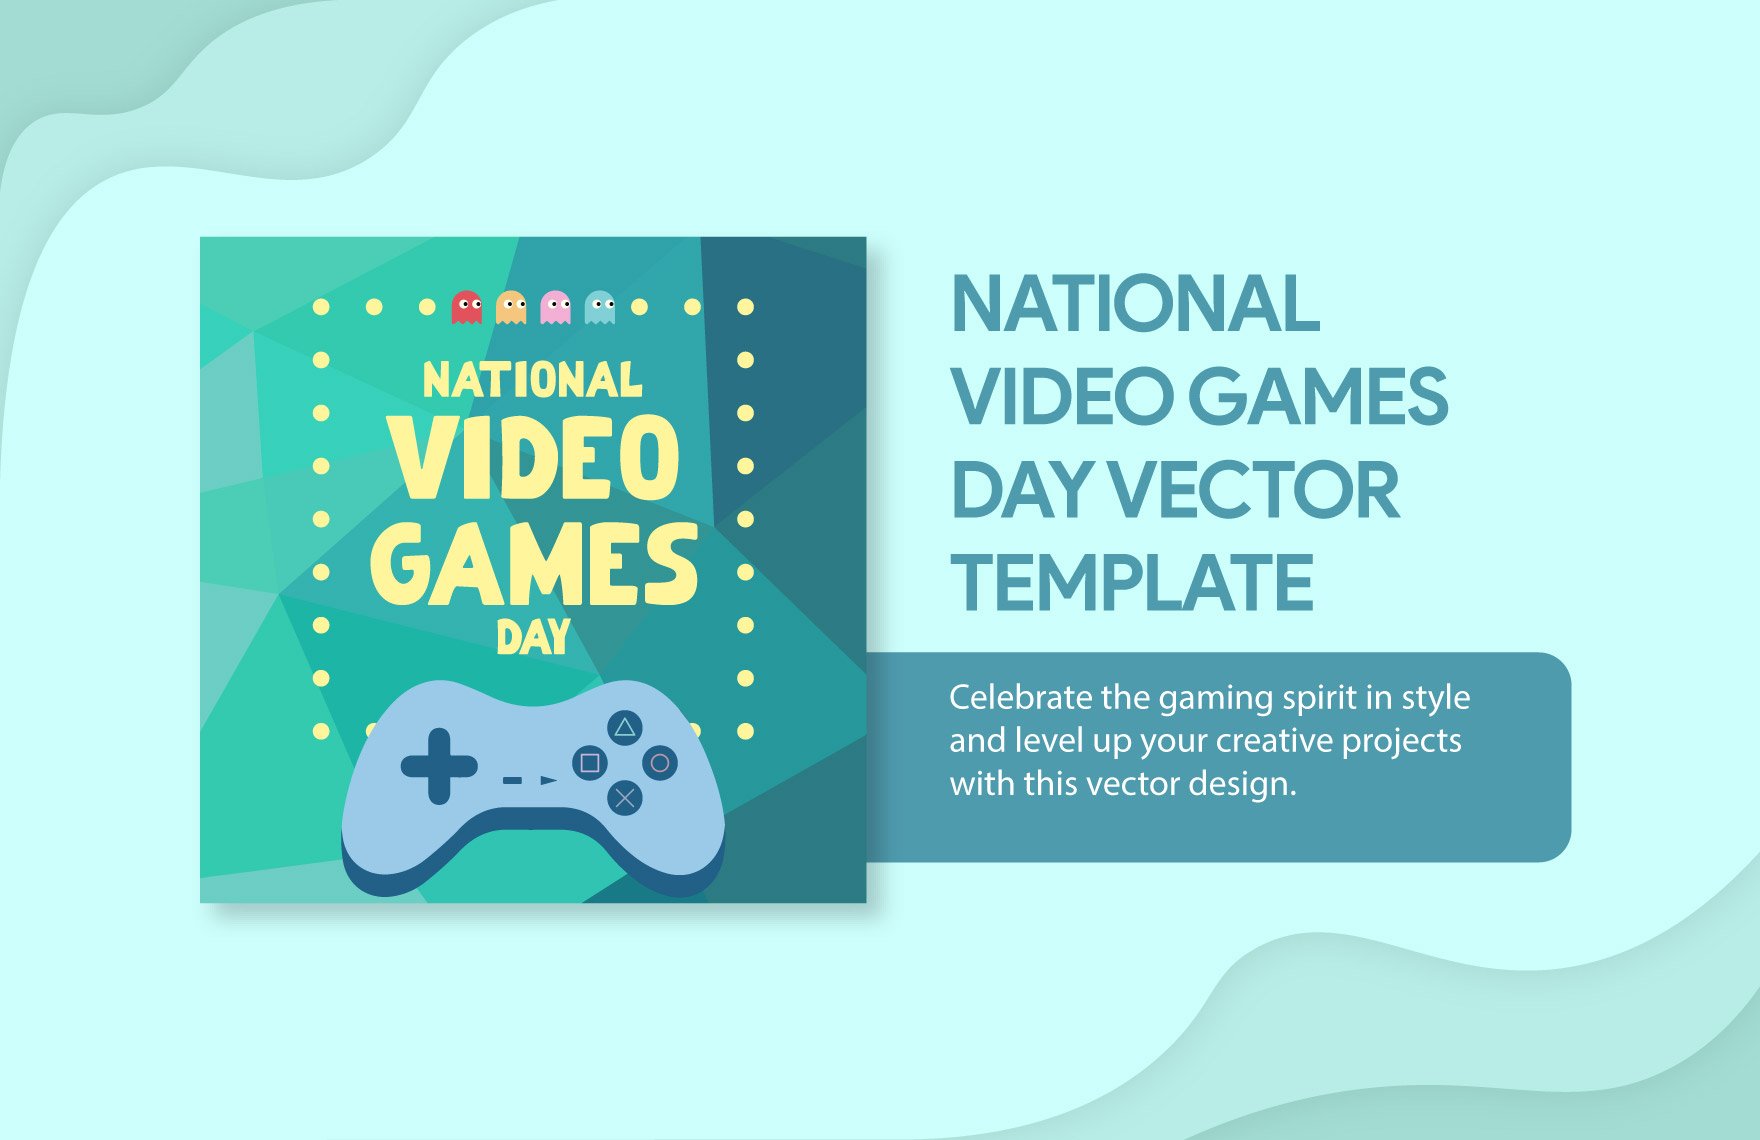 Free National Video Games Day Vector  in Illustrator, PSD, PNG